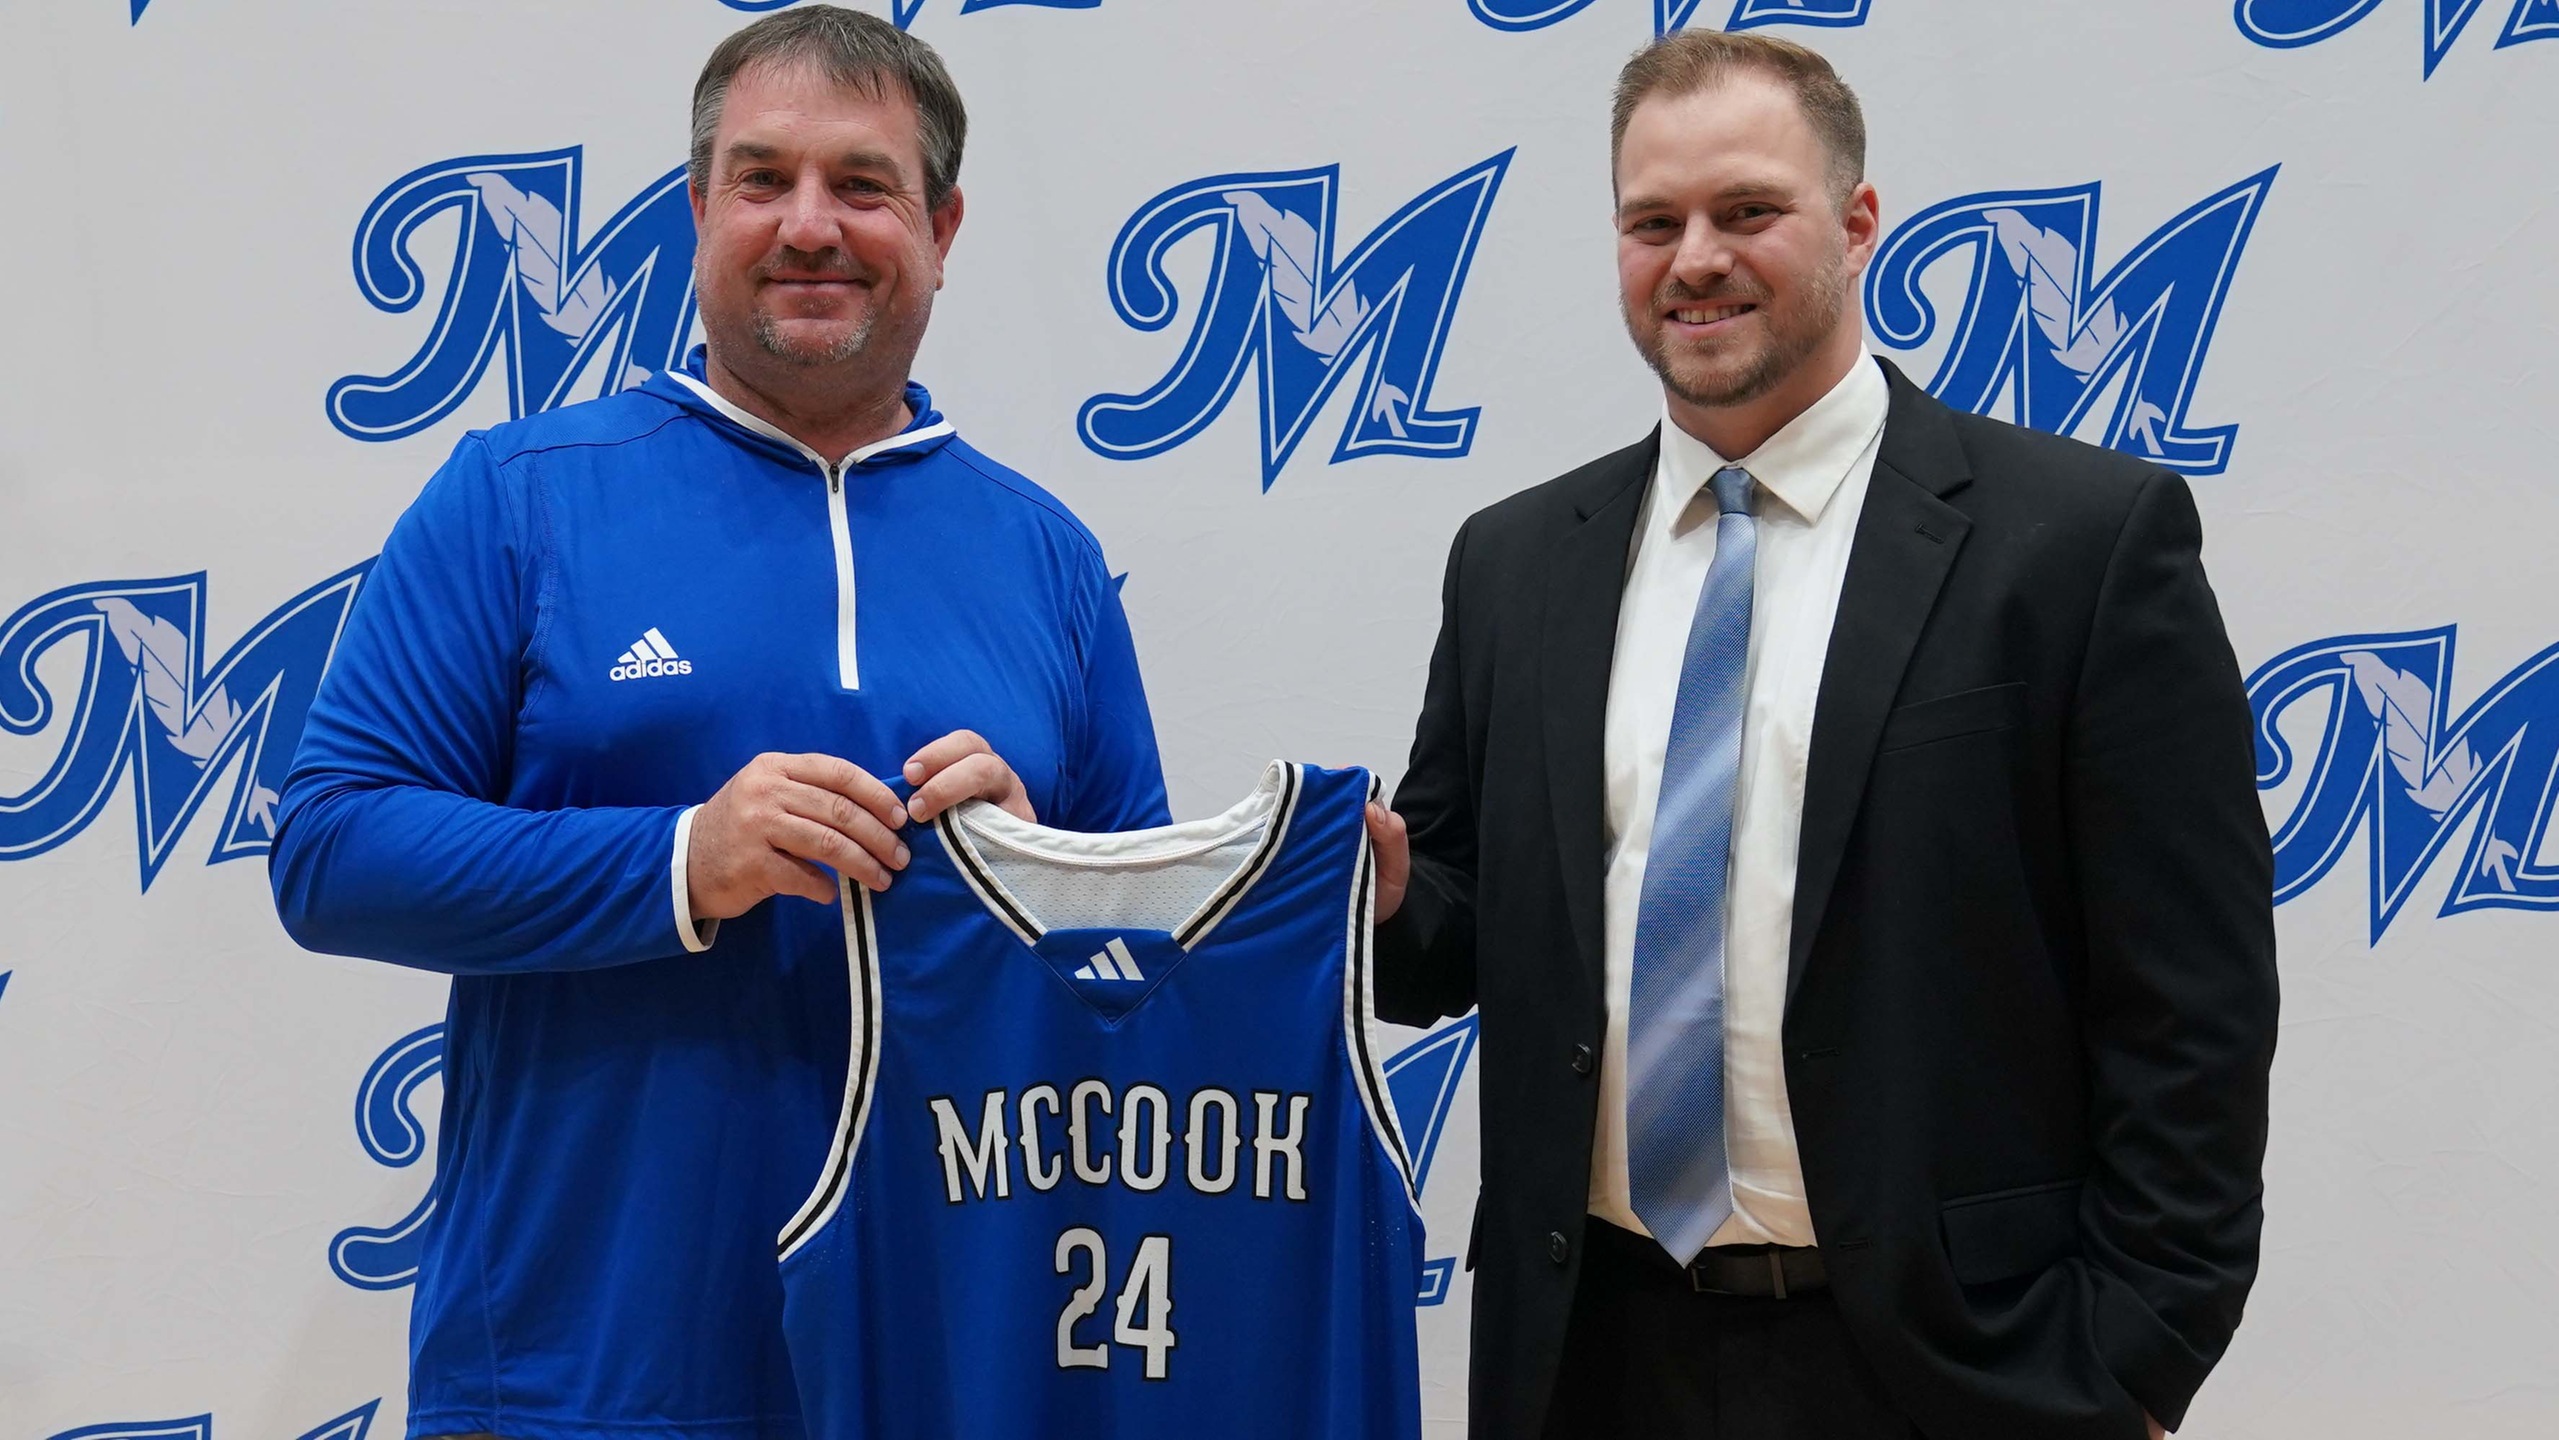 National champion coach to head MCC men&rsquo;s basketball